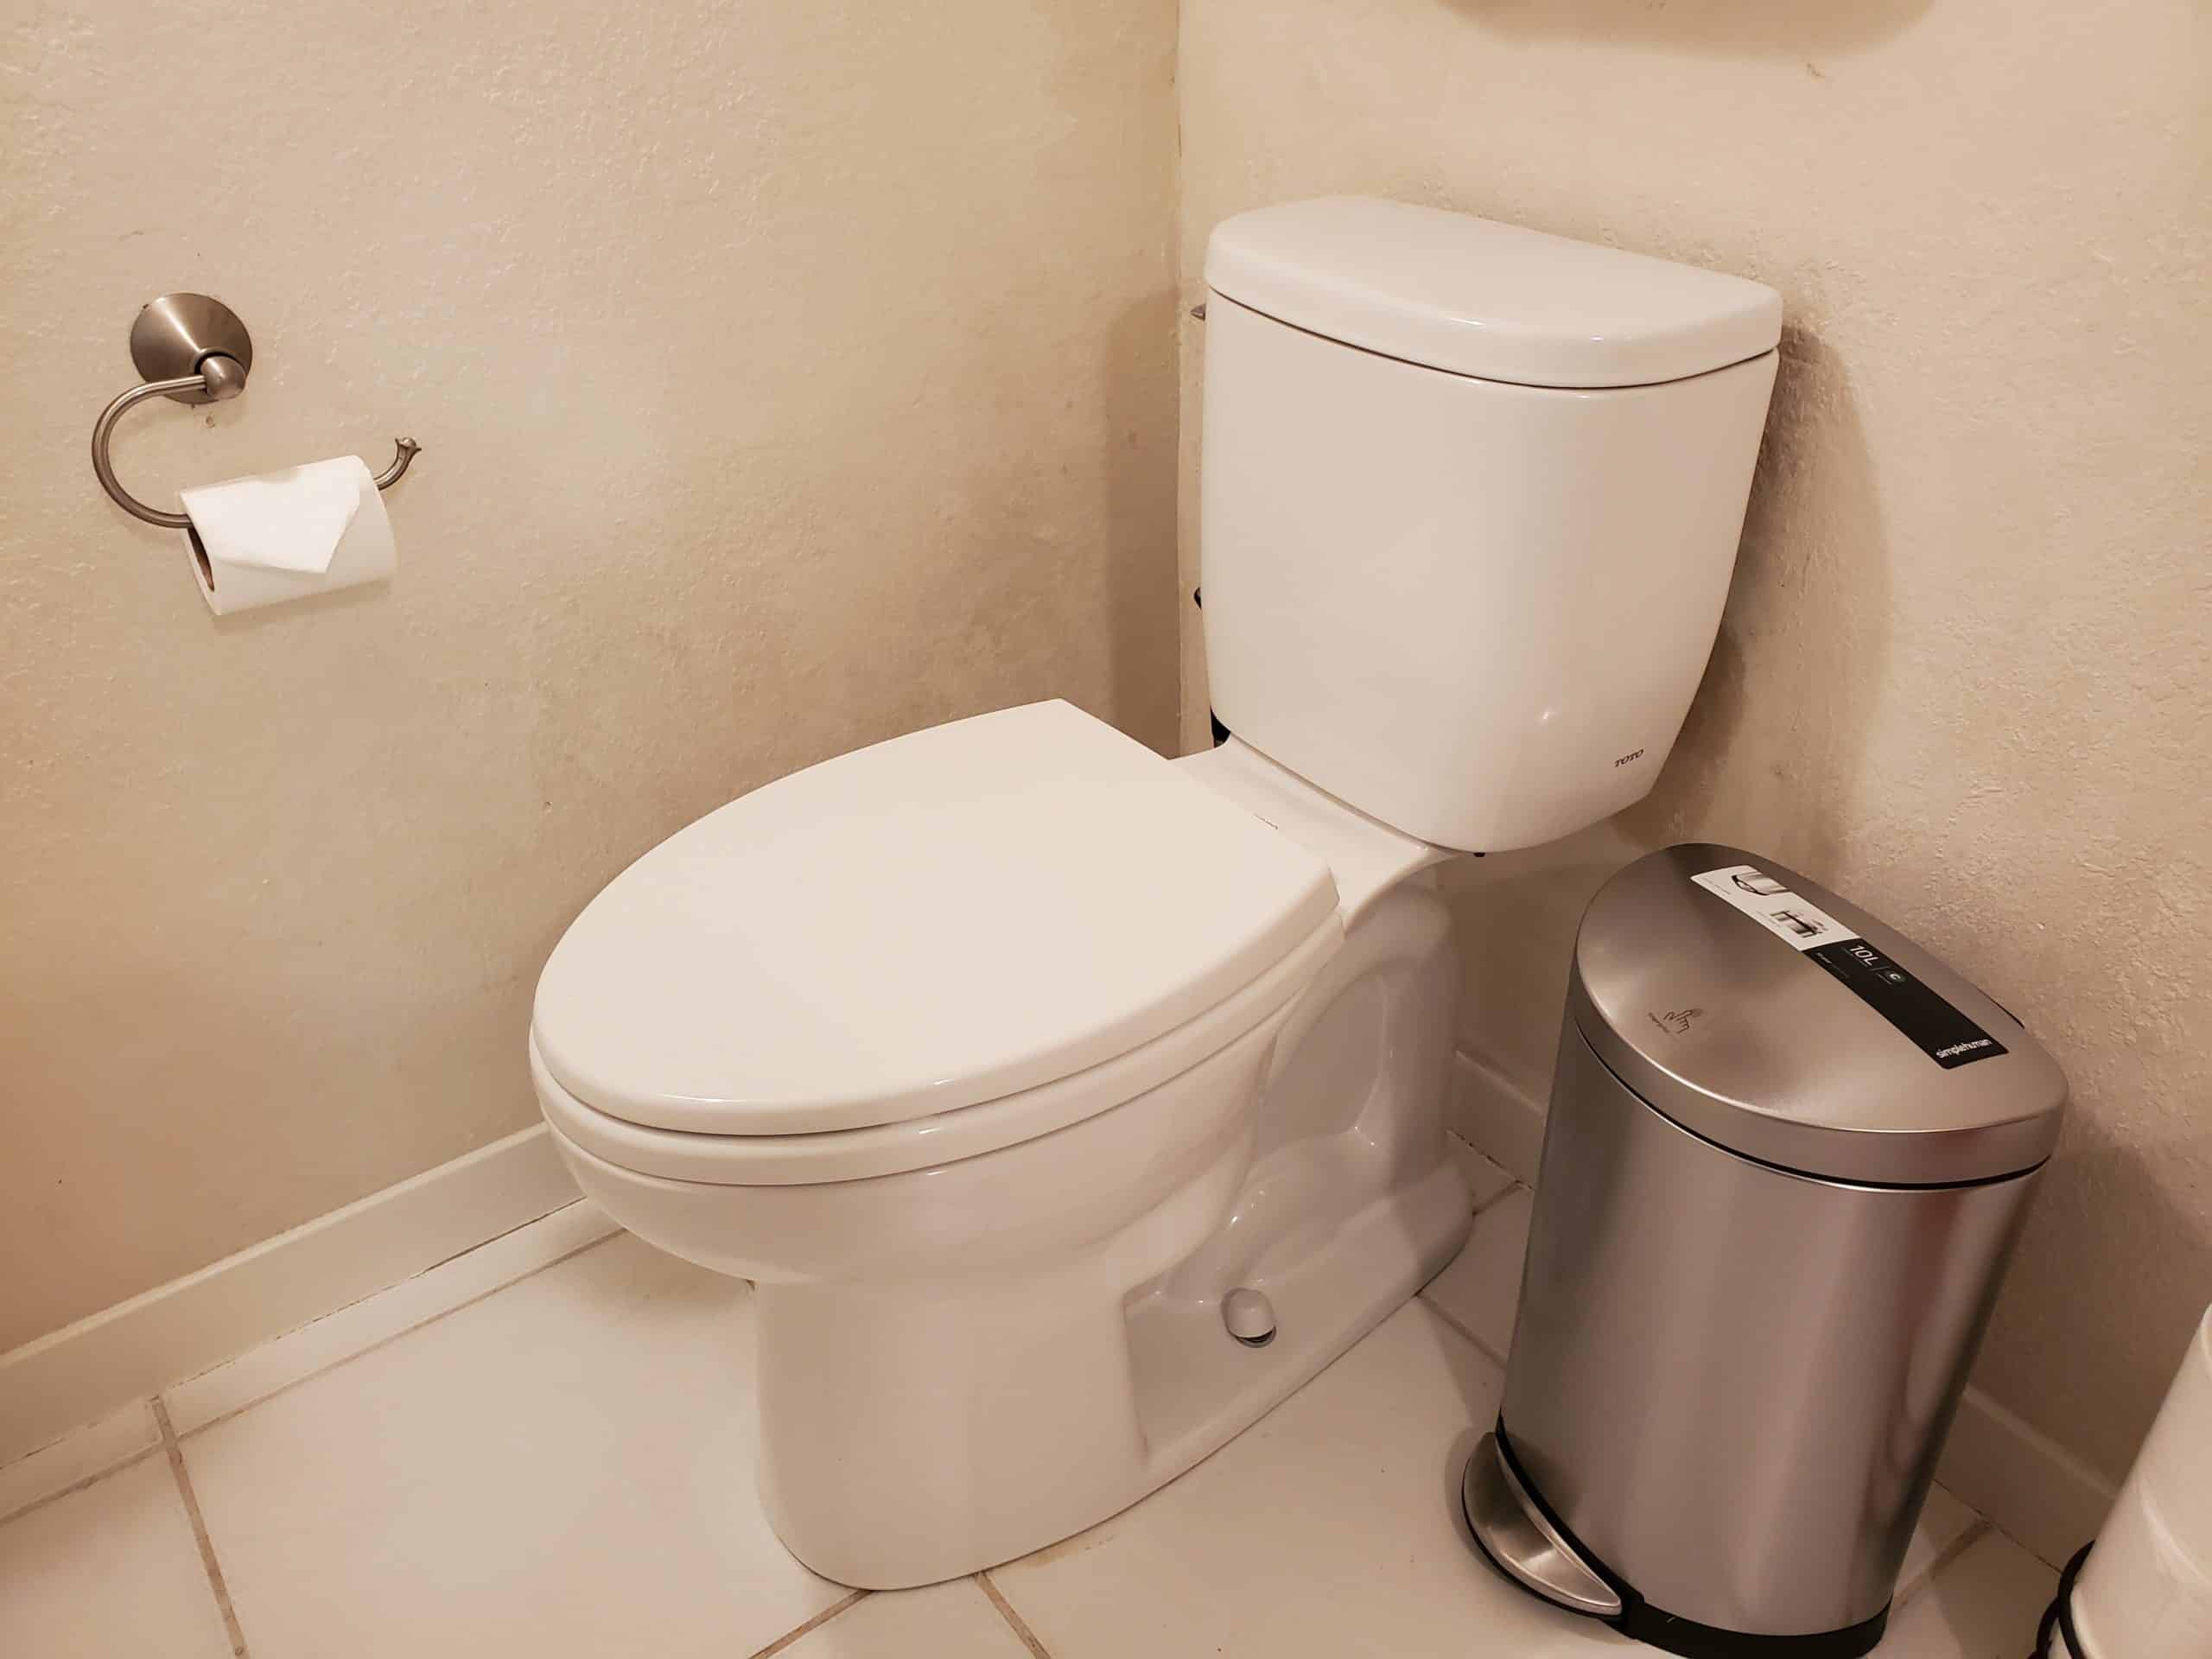 Researchers Create Smart Toilets That Will Analyze Urine & Feces Samples To Diagnose Gastrointestinal Diseases